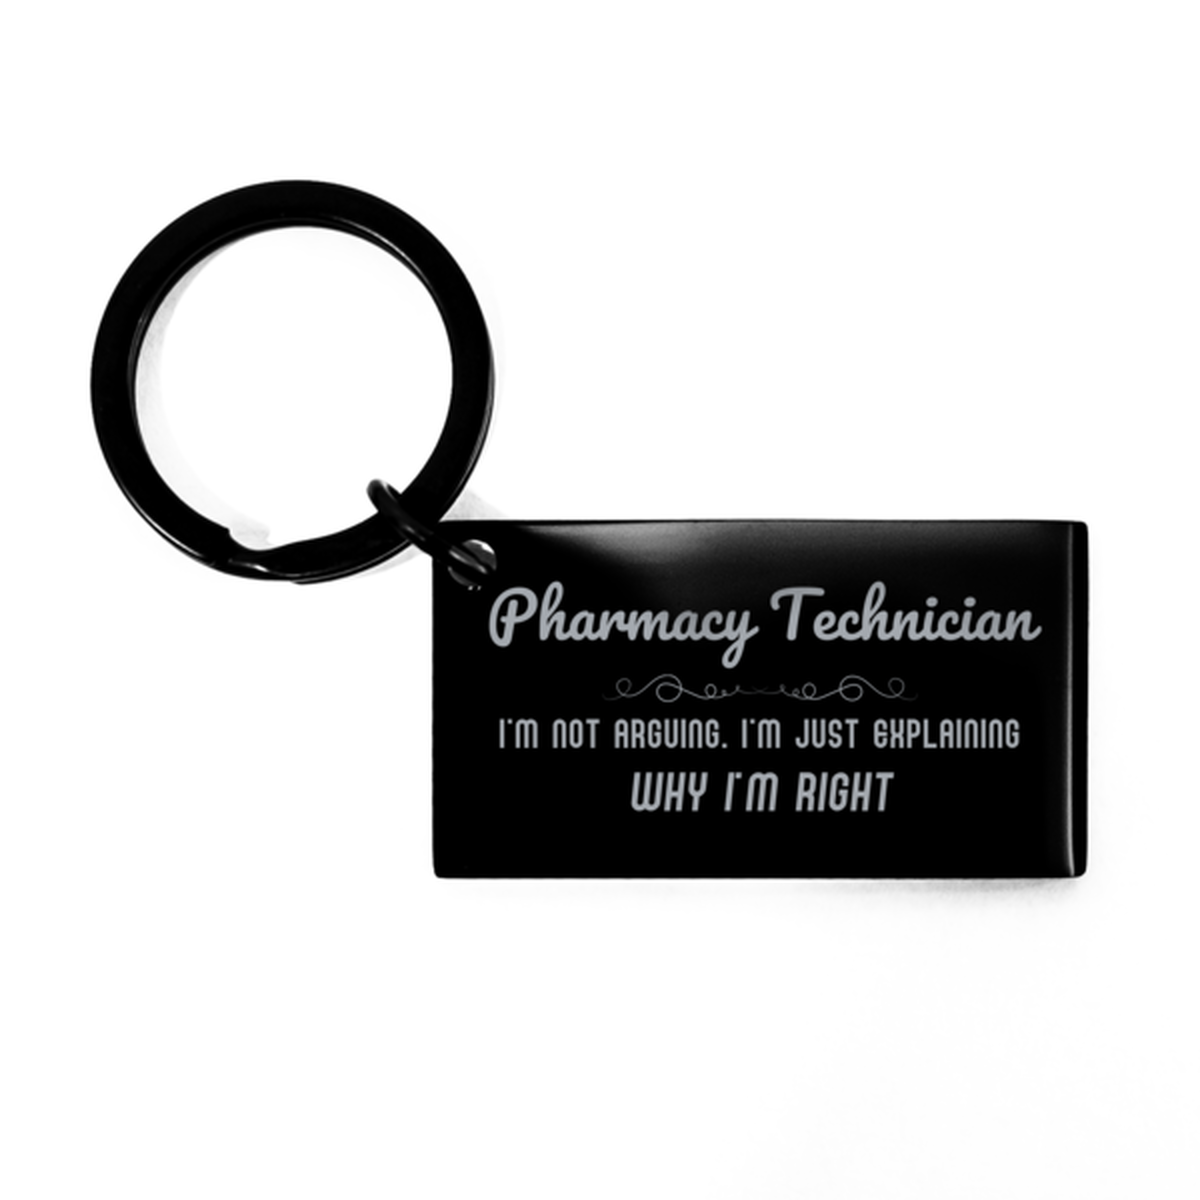 Pharmacy Technician I'm not Arguing. I'm Just Explaining Why I'm RIGHT Keychain, Funny Saying Quote Pharmacy Technician Gifts For Pharmacy Technician Graduation Birthday Christmas Gifts for Men Women Coworker